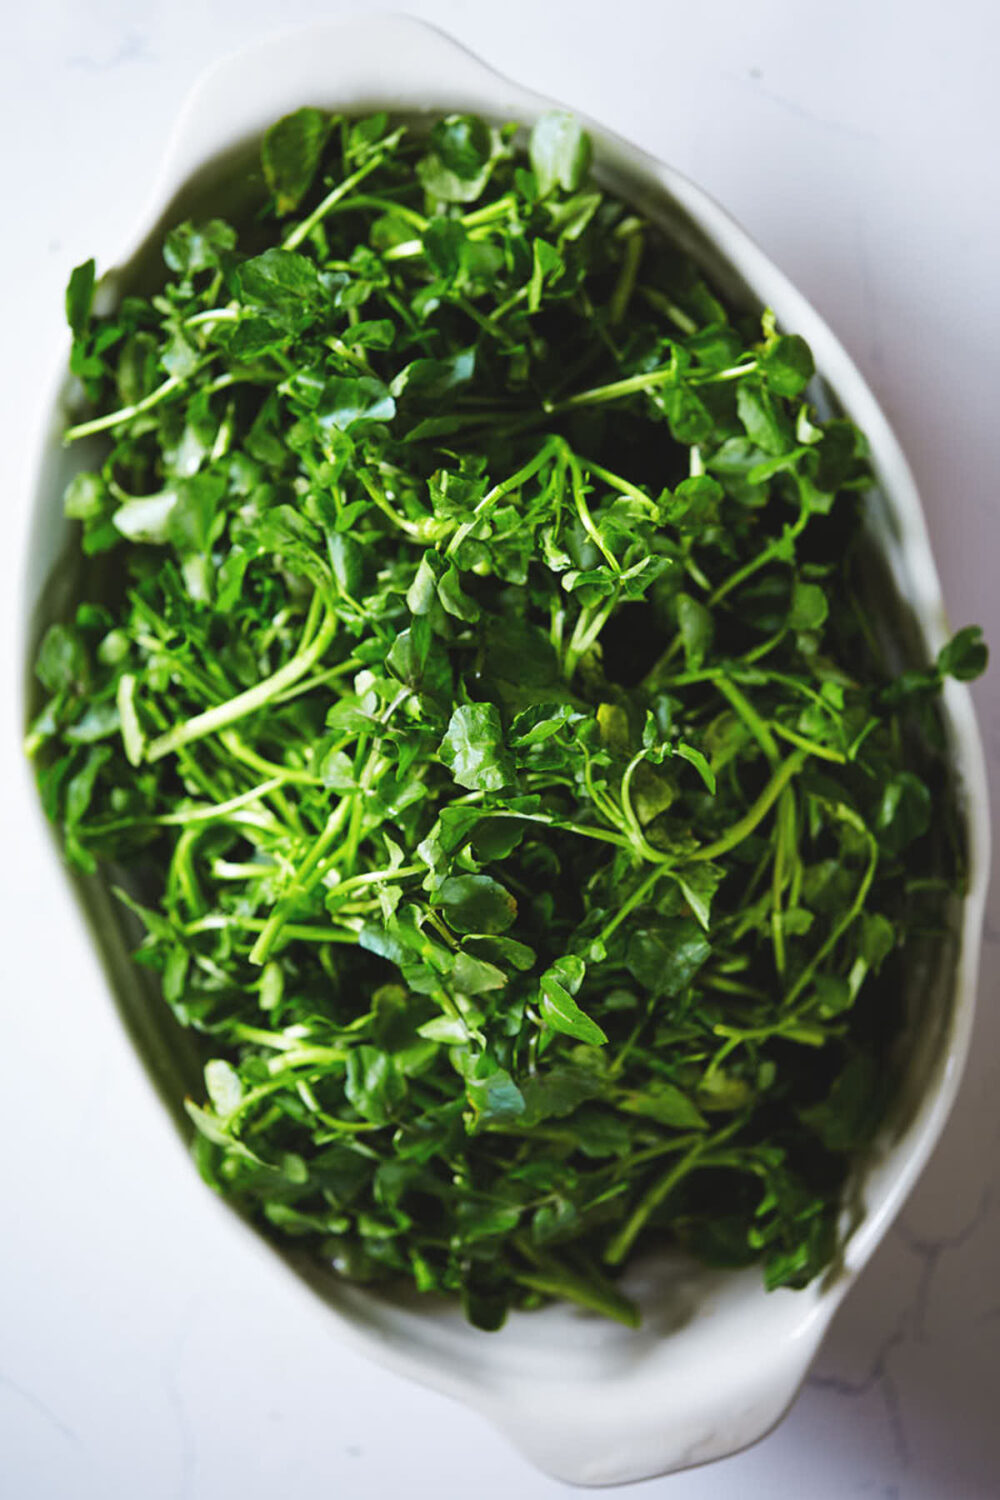 Watercress is a large bowl after being washed